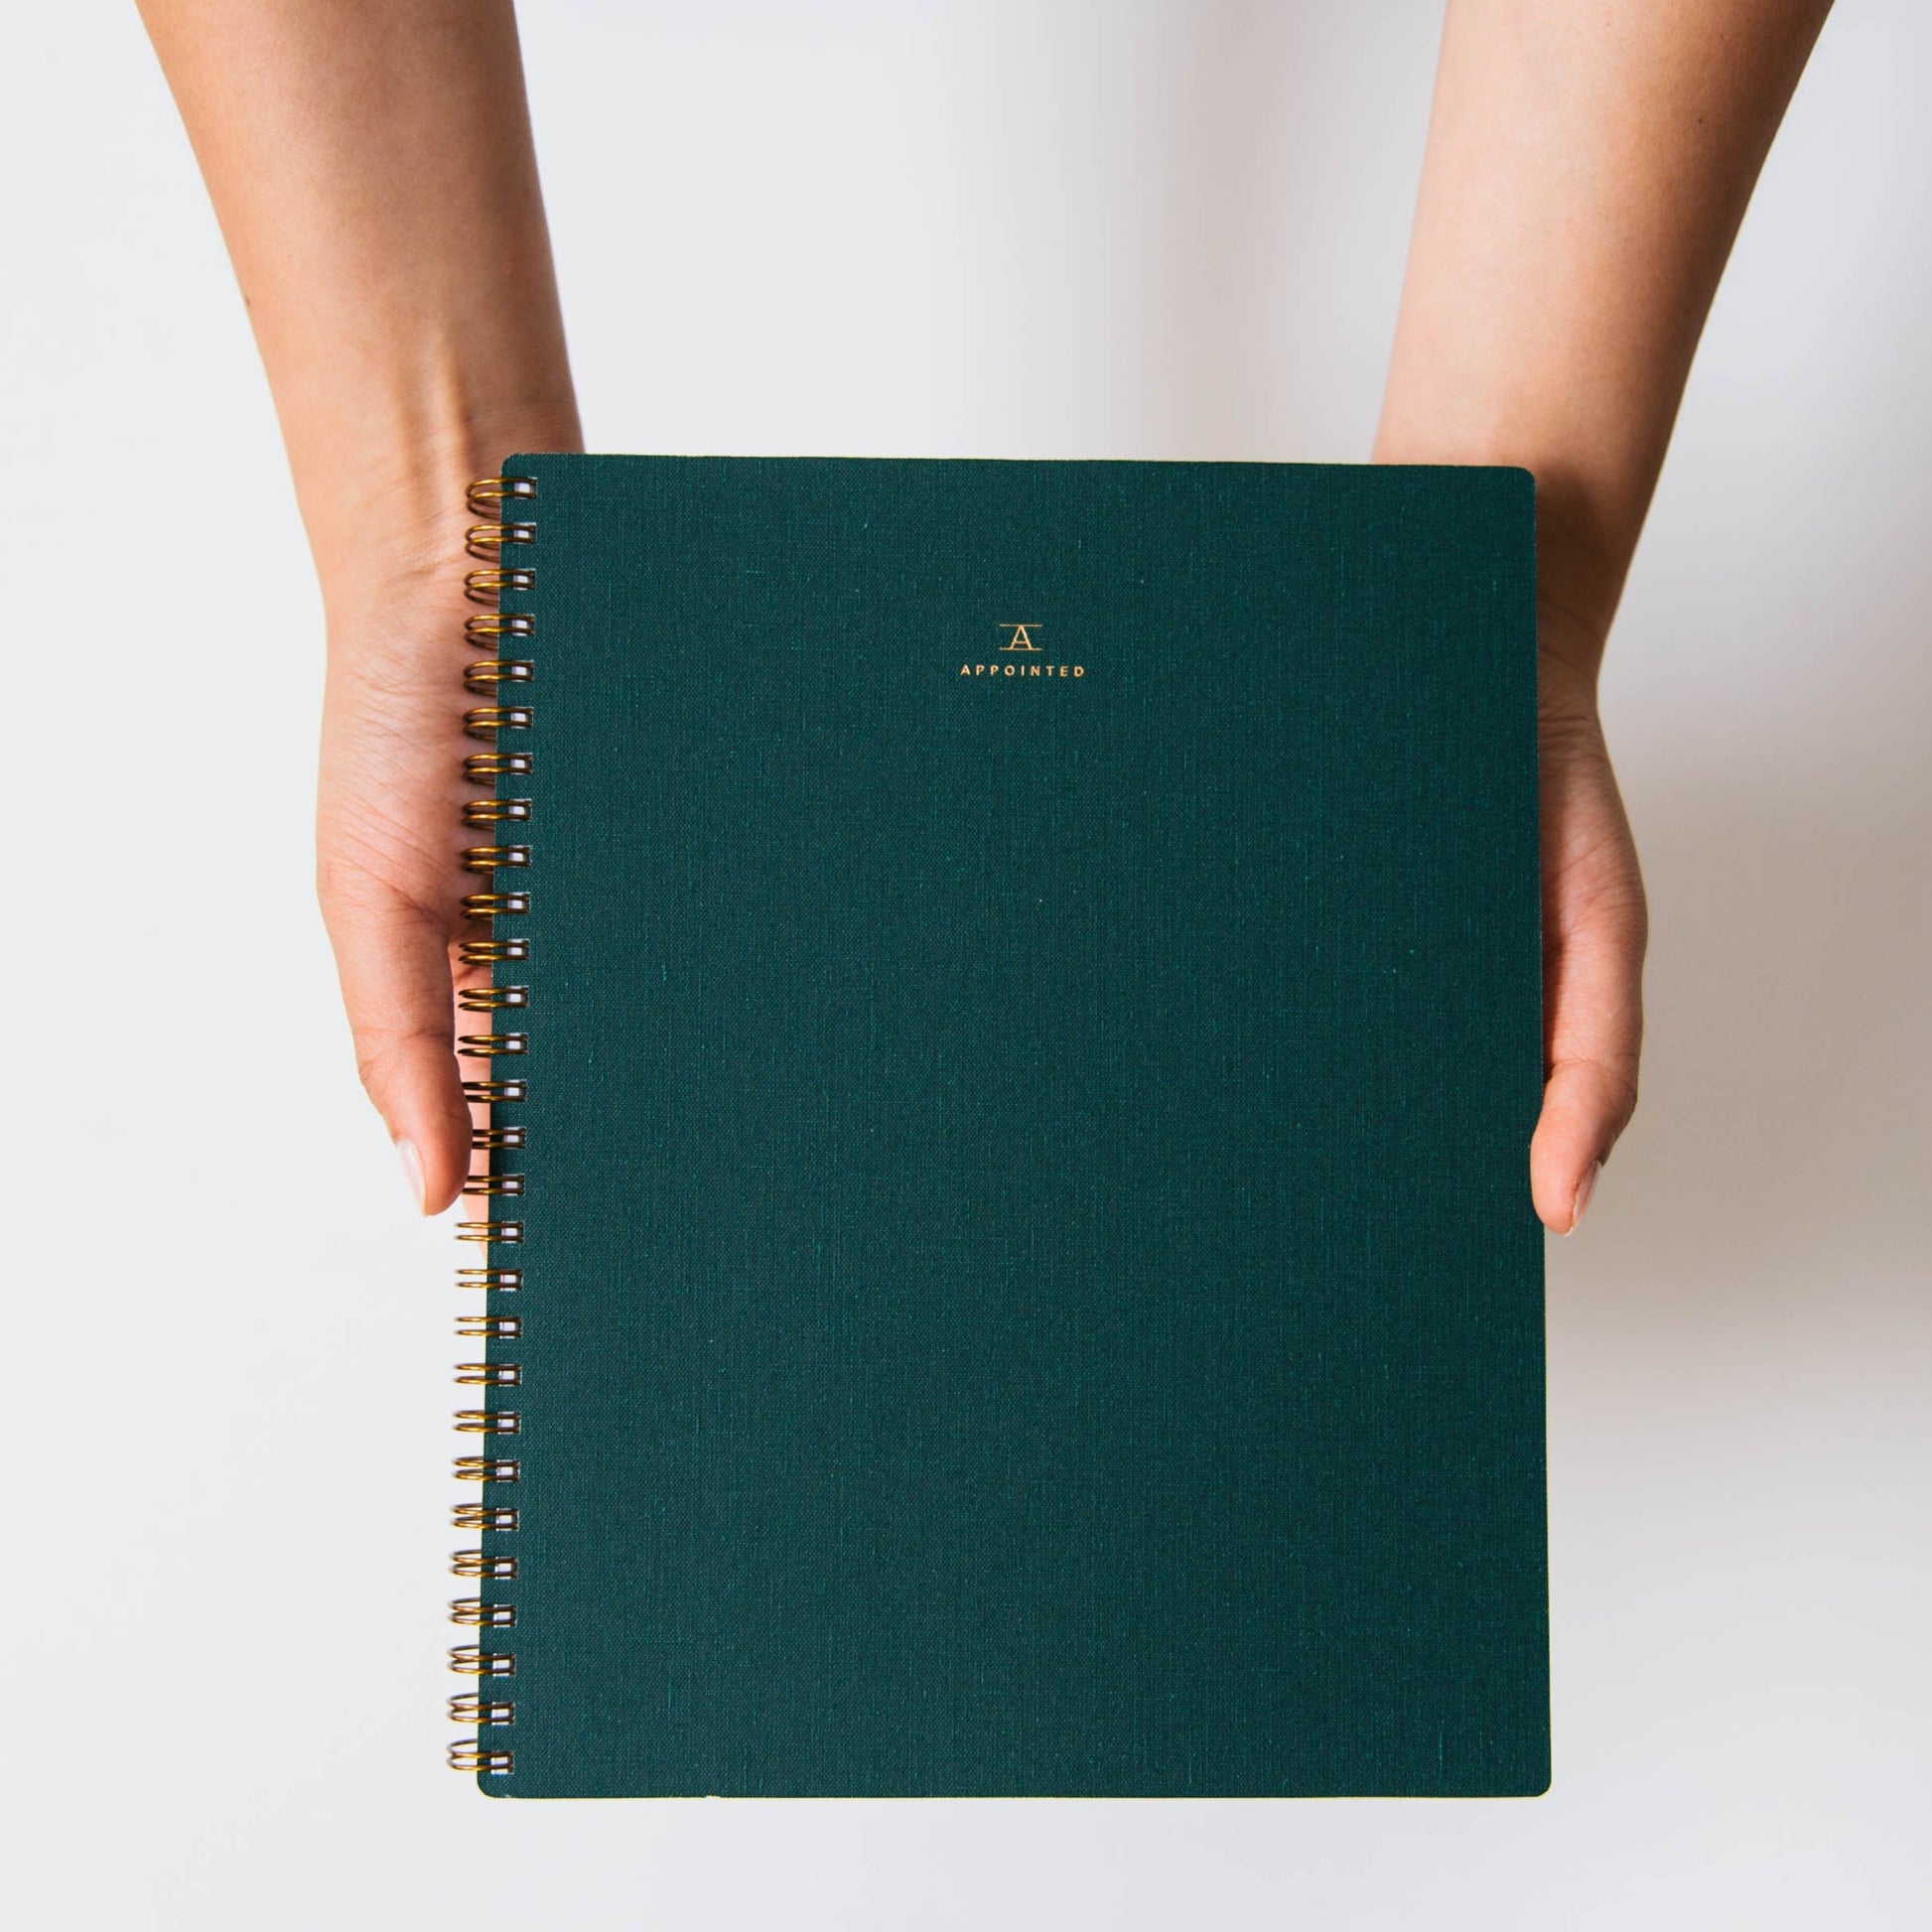 Appointed Notebook Fern Green